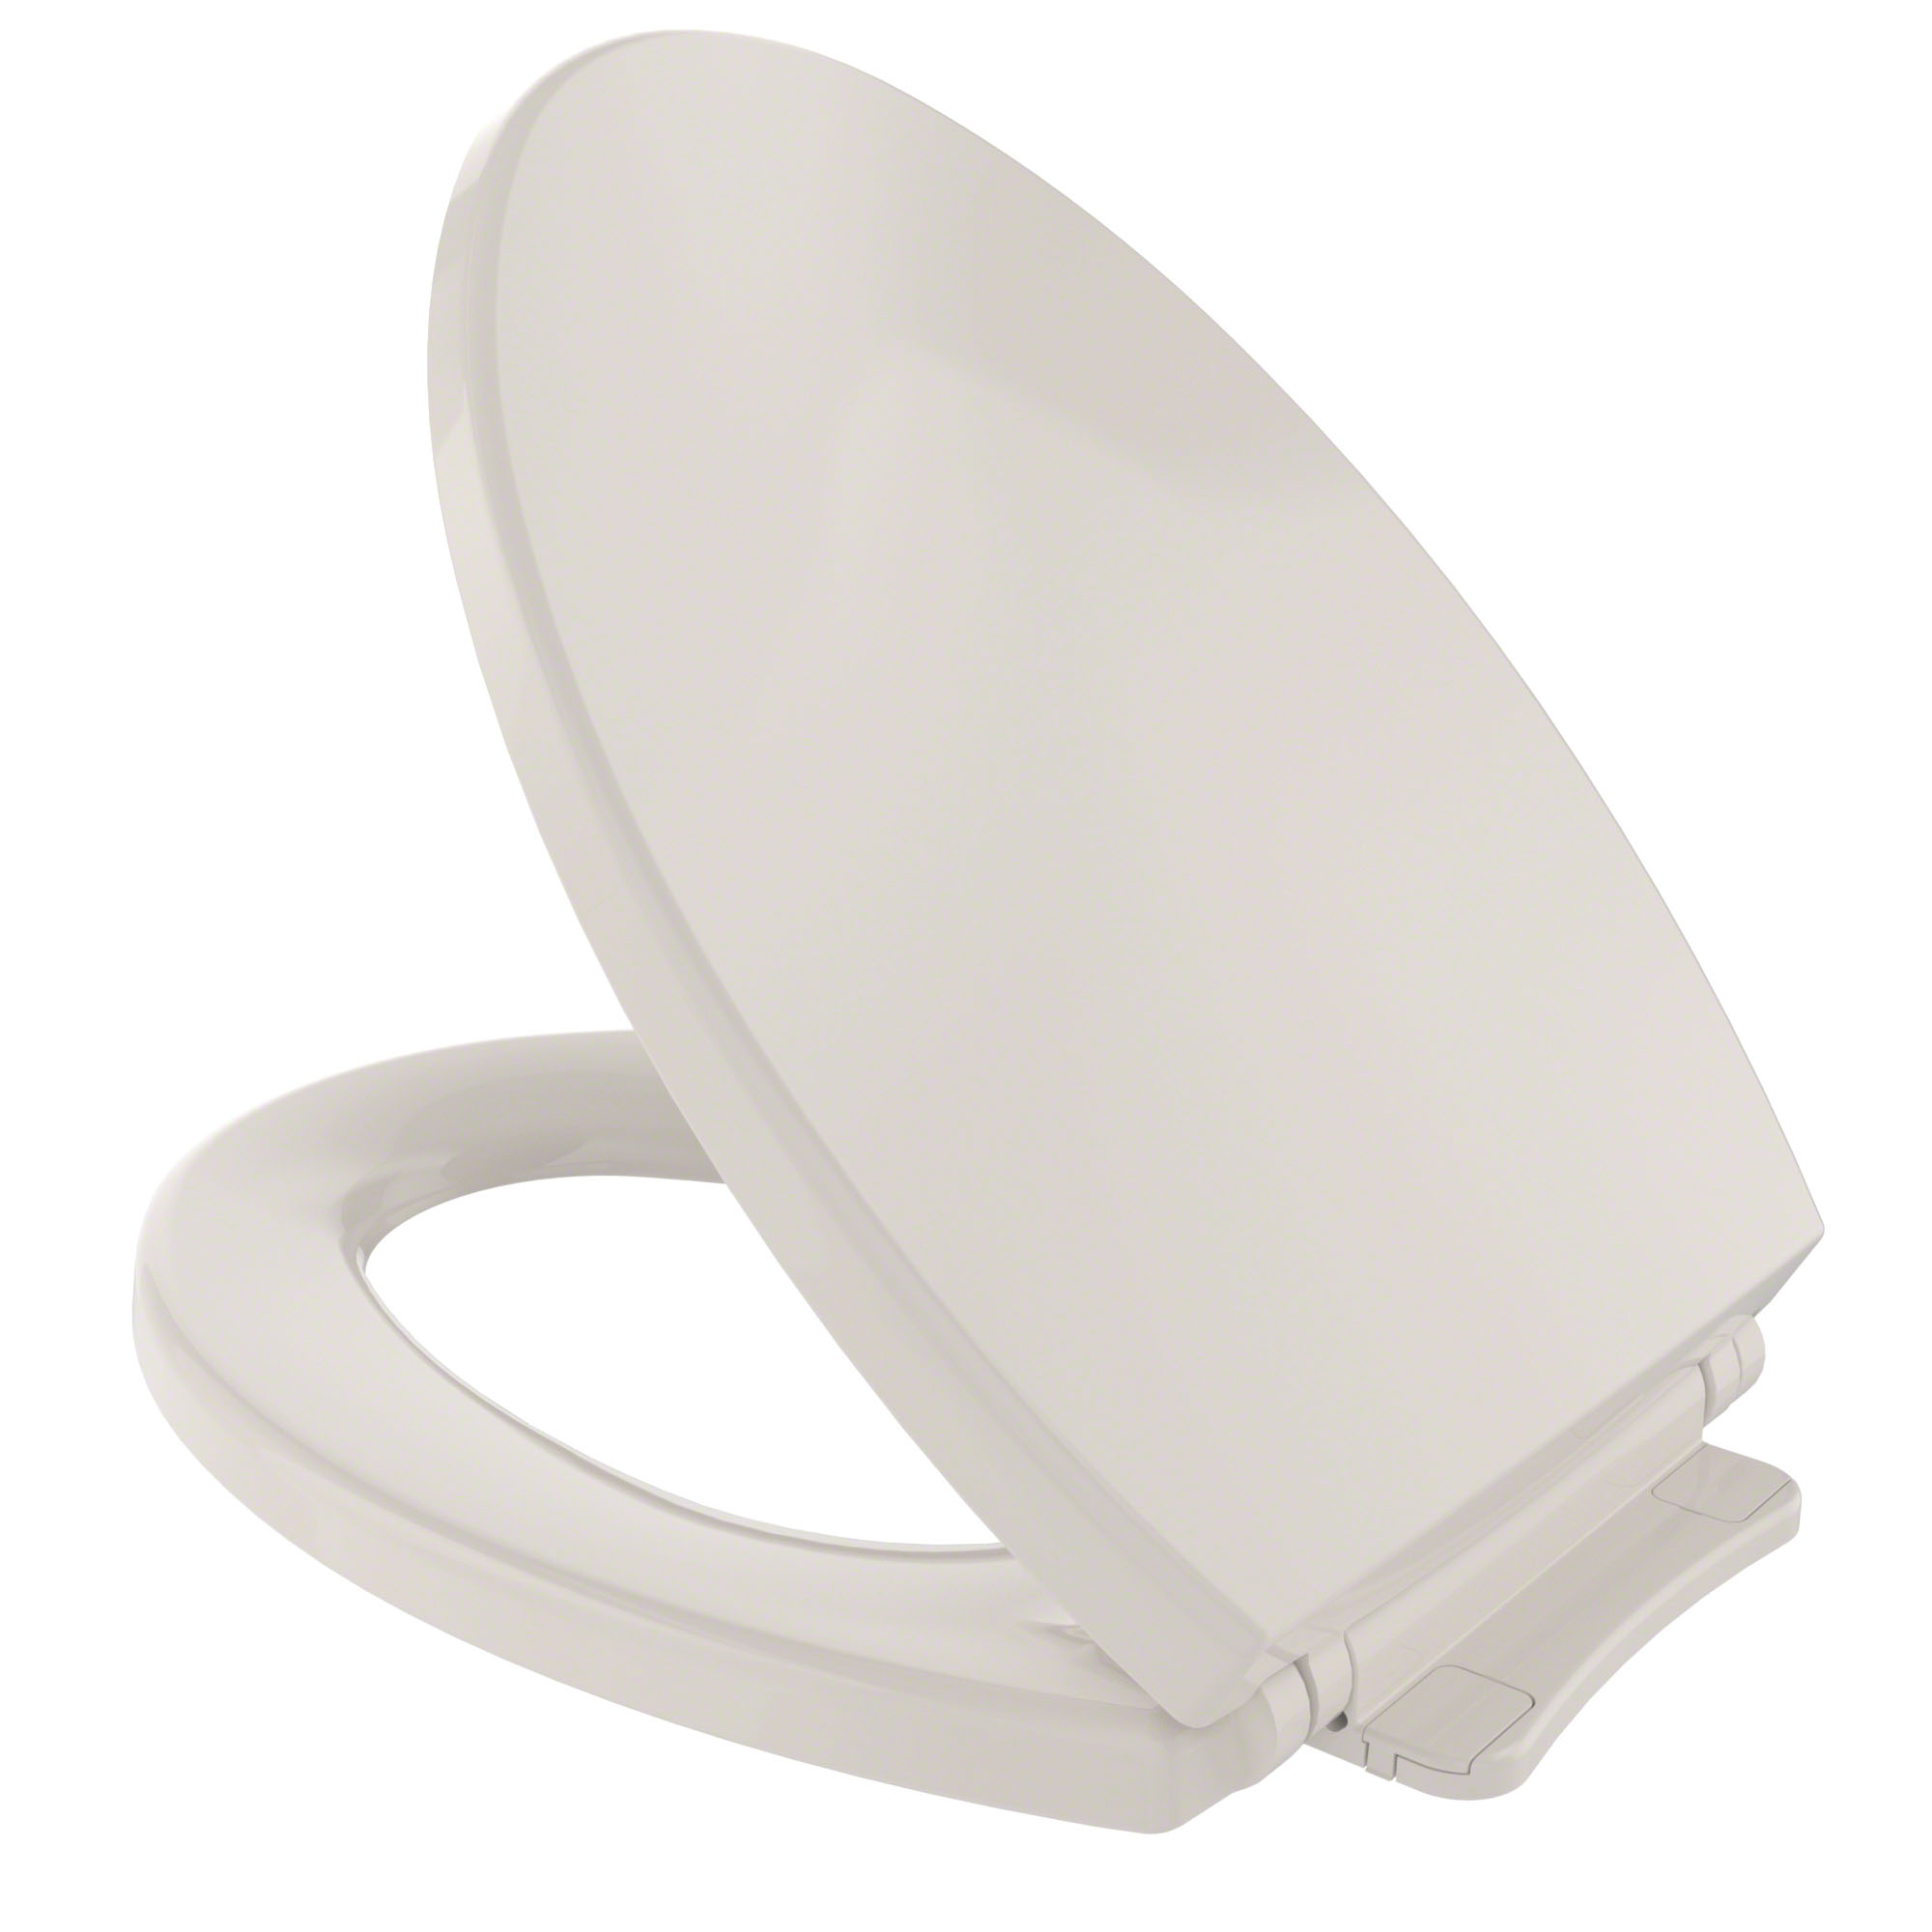 Toto® SS114#12 Toilet Seat With Cover, Elongated Bowl, Closed Front, Polypropylene, Sedona Beige, SoftClose® Hinge, Import